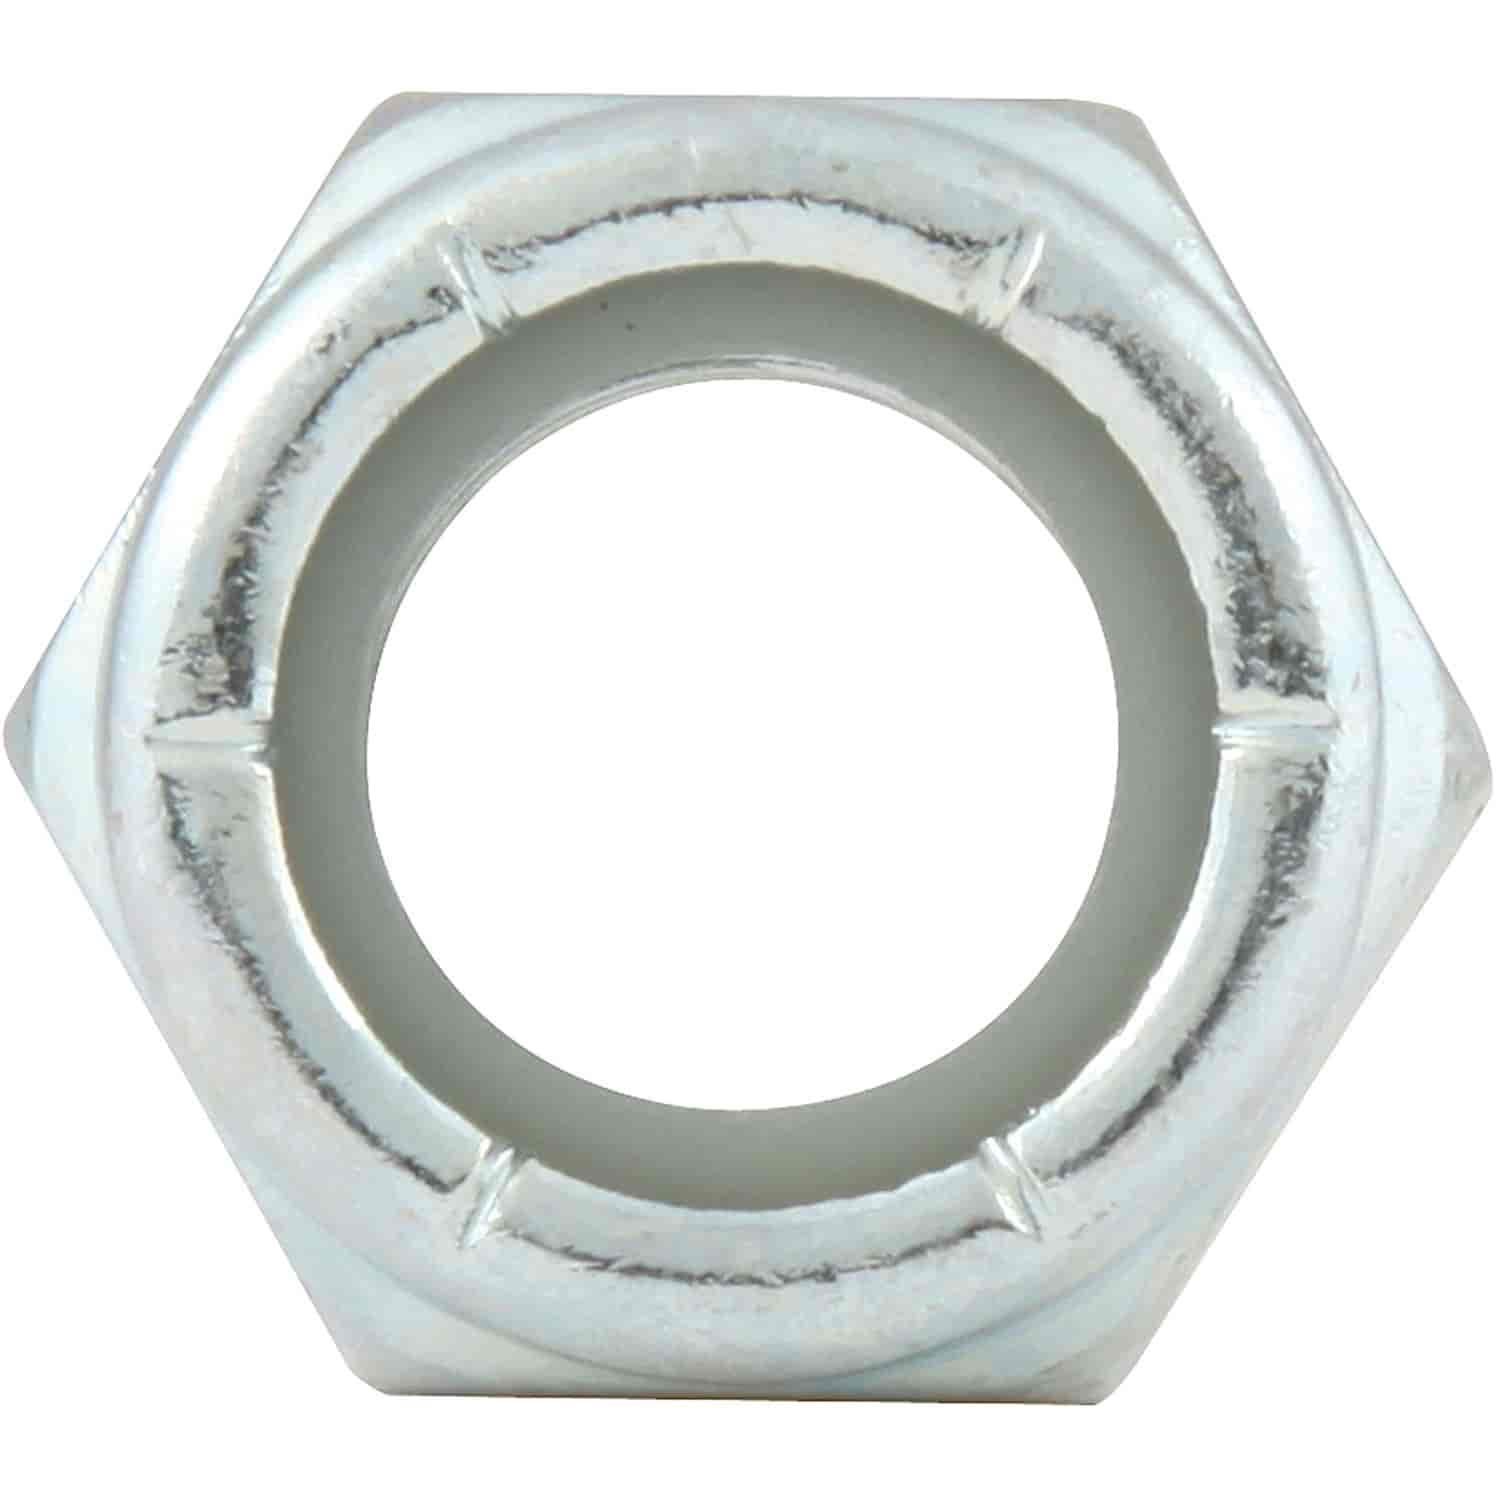 Coarse Thread Hex Nuts With Nylon Inserts 1/2